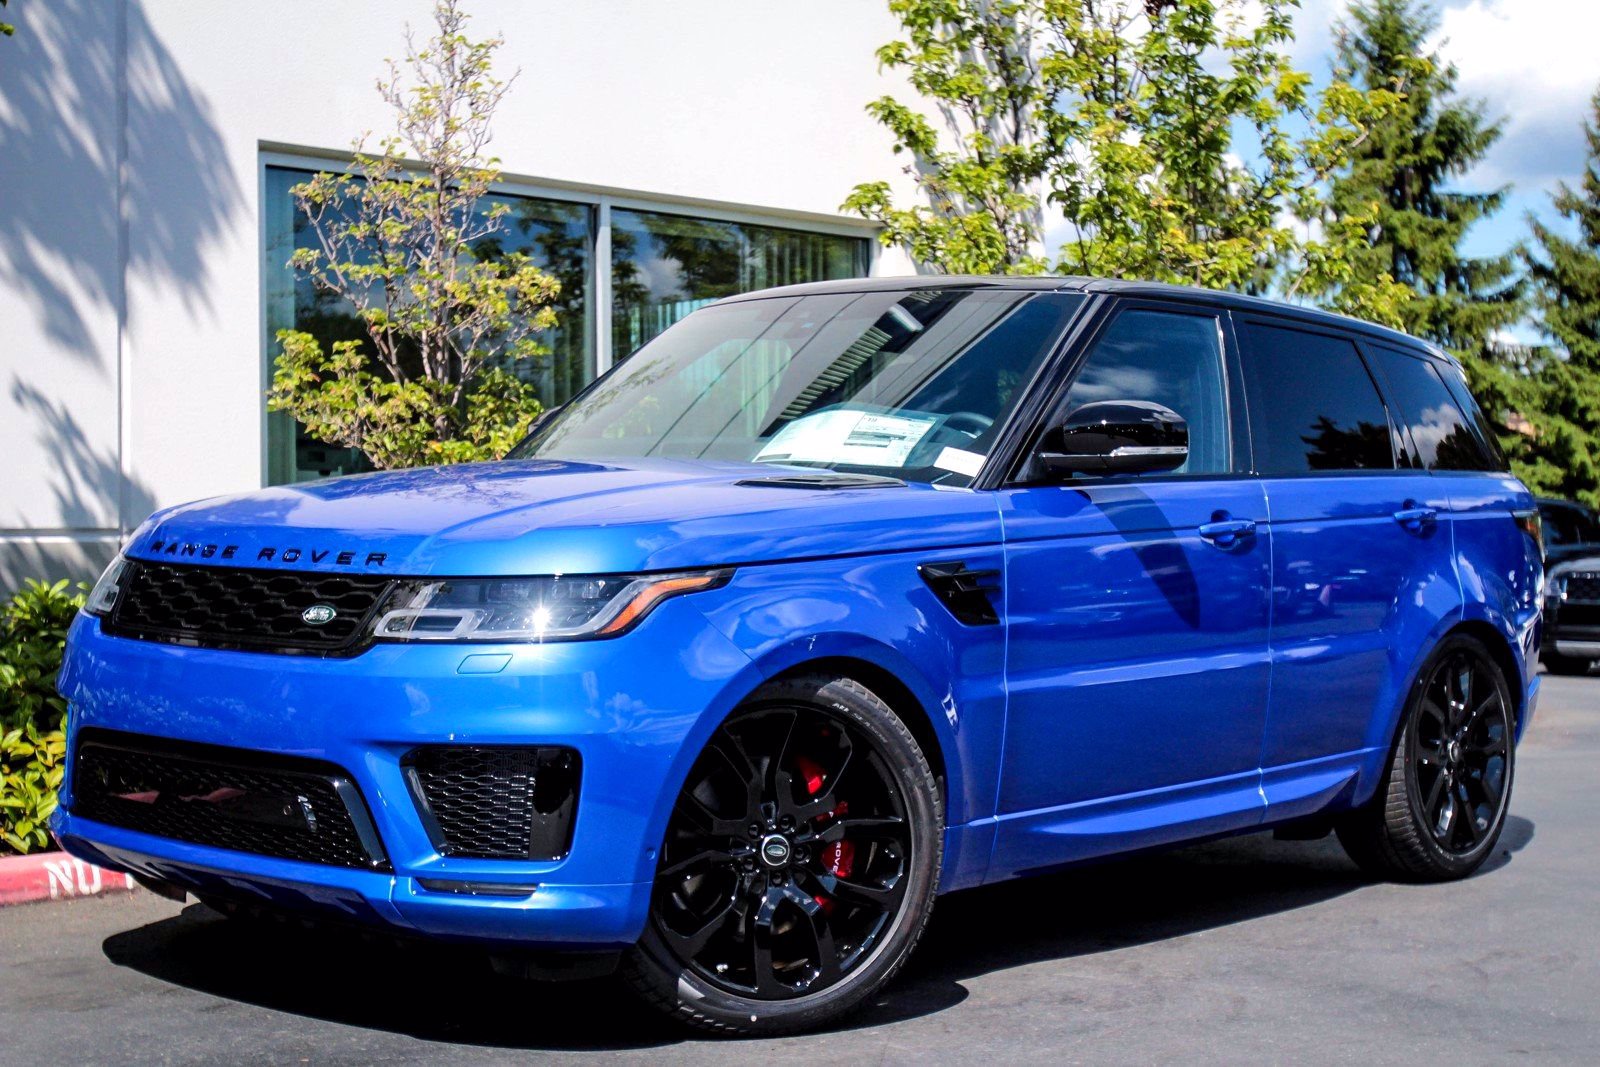 Range Rover For Sale Bellevue  : By The Time I Came In The Vehicle I Came Into Was Being Sold.